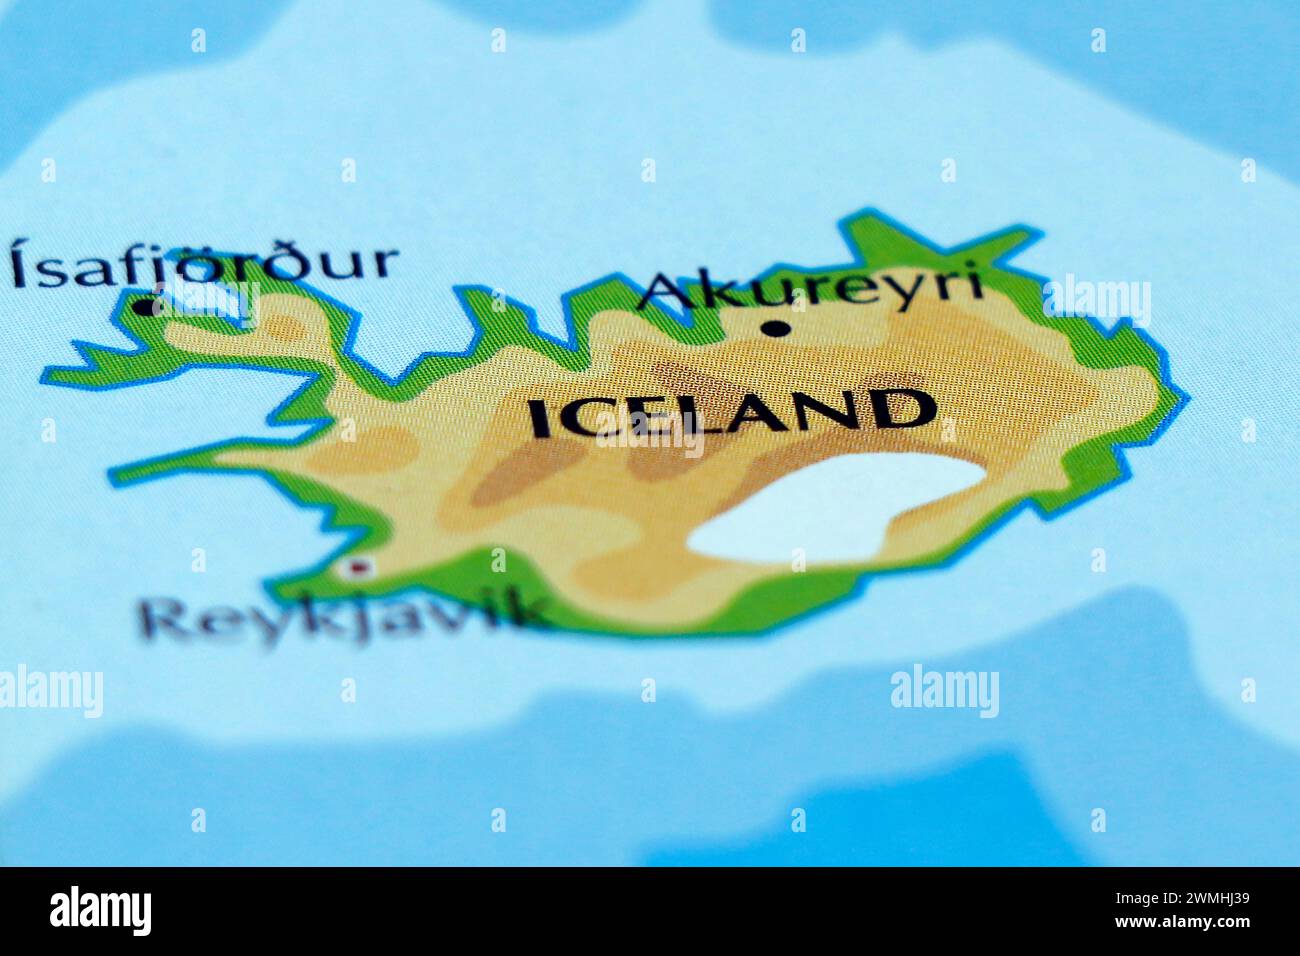 world map of europe, iceland in close up Stock Photo